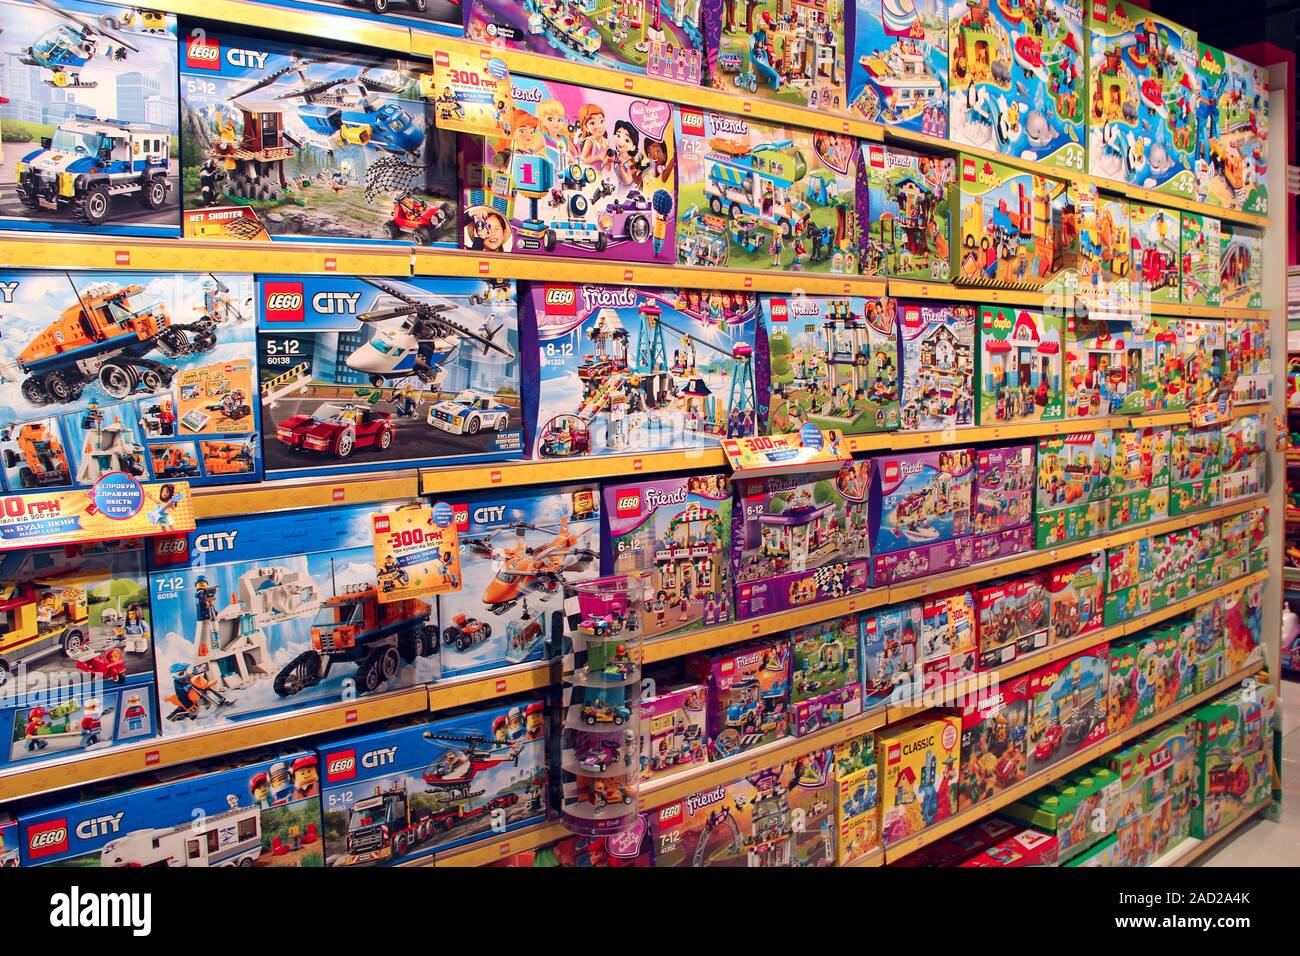 toy store shelves